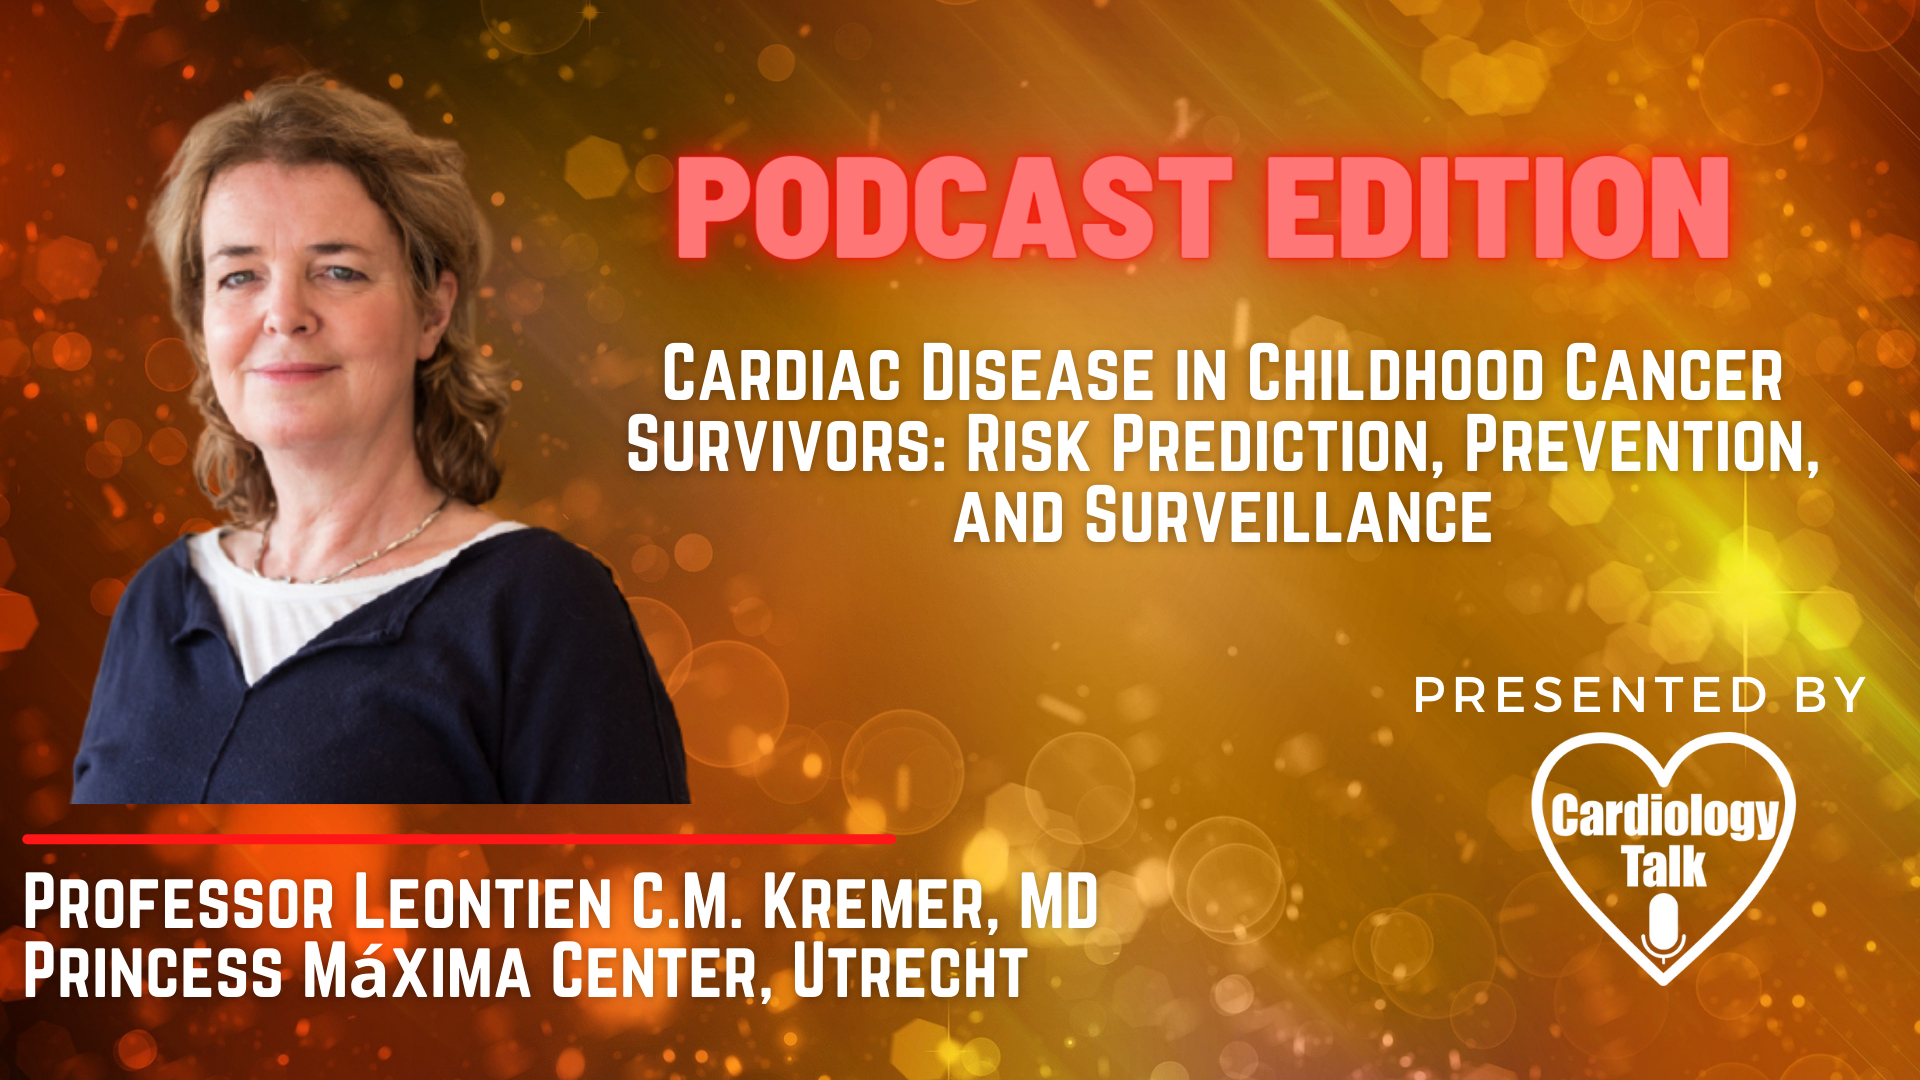 Podcast- Professor Leontien Kremer, MD - Cardiac Disease in Childhood Cancer Survivors: Risk Prediction, Prevention, and Surveillance: JACC CardioOncology State-of-the-Art Review @leontie...